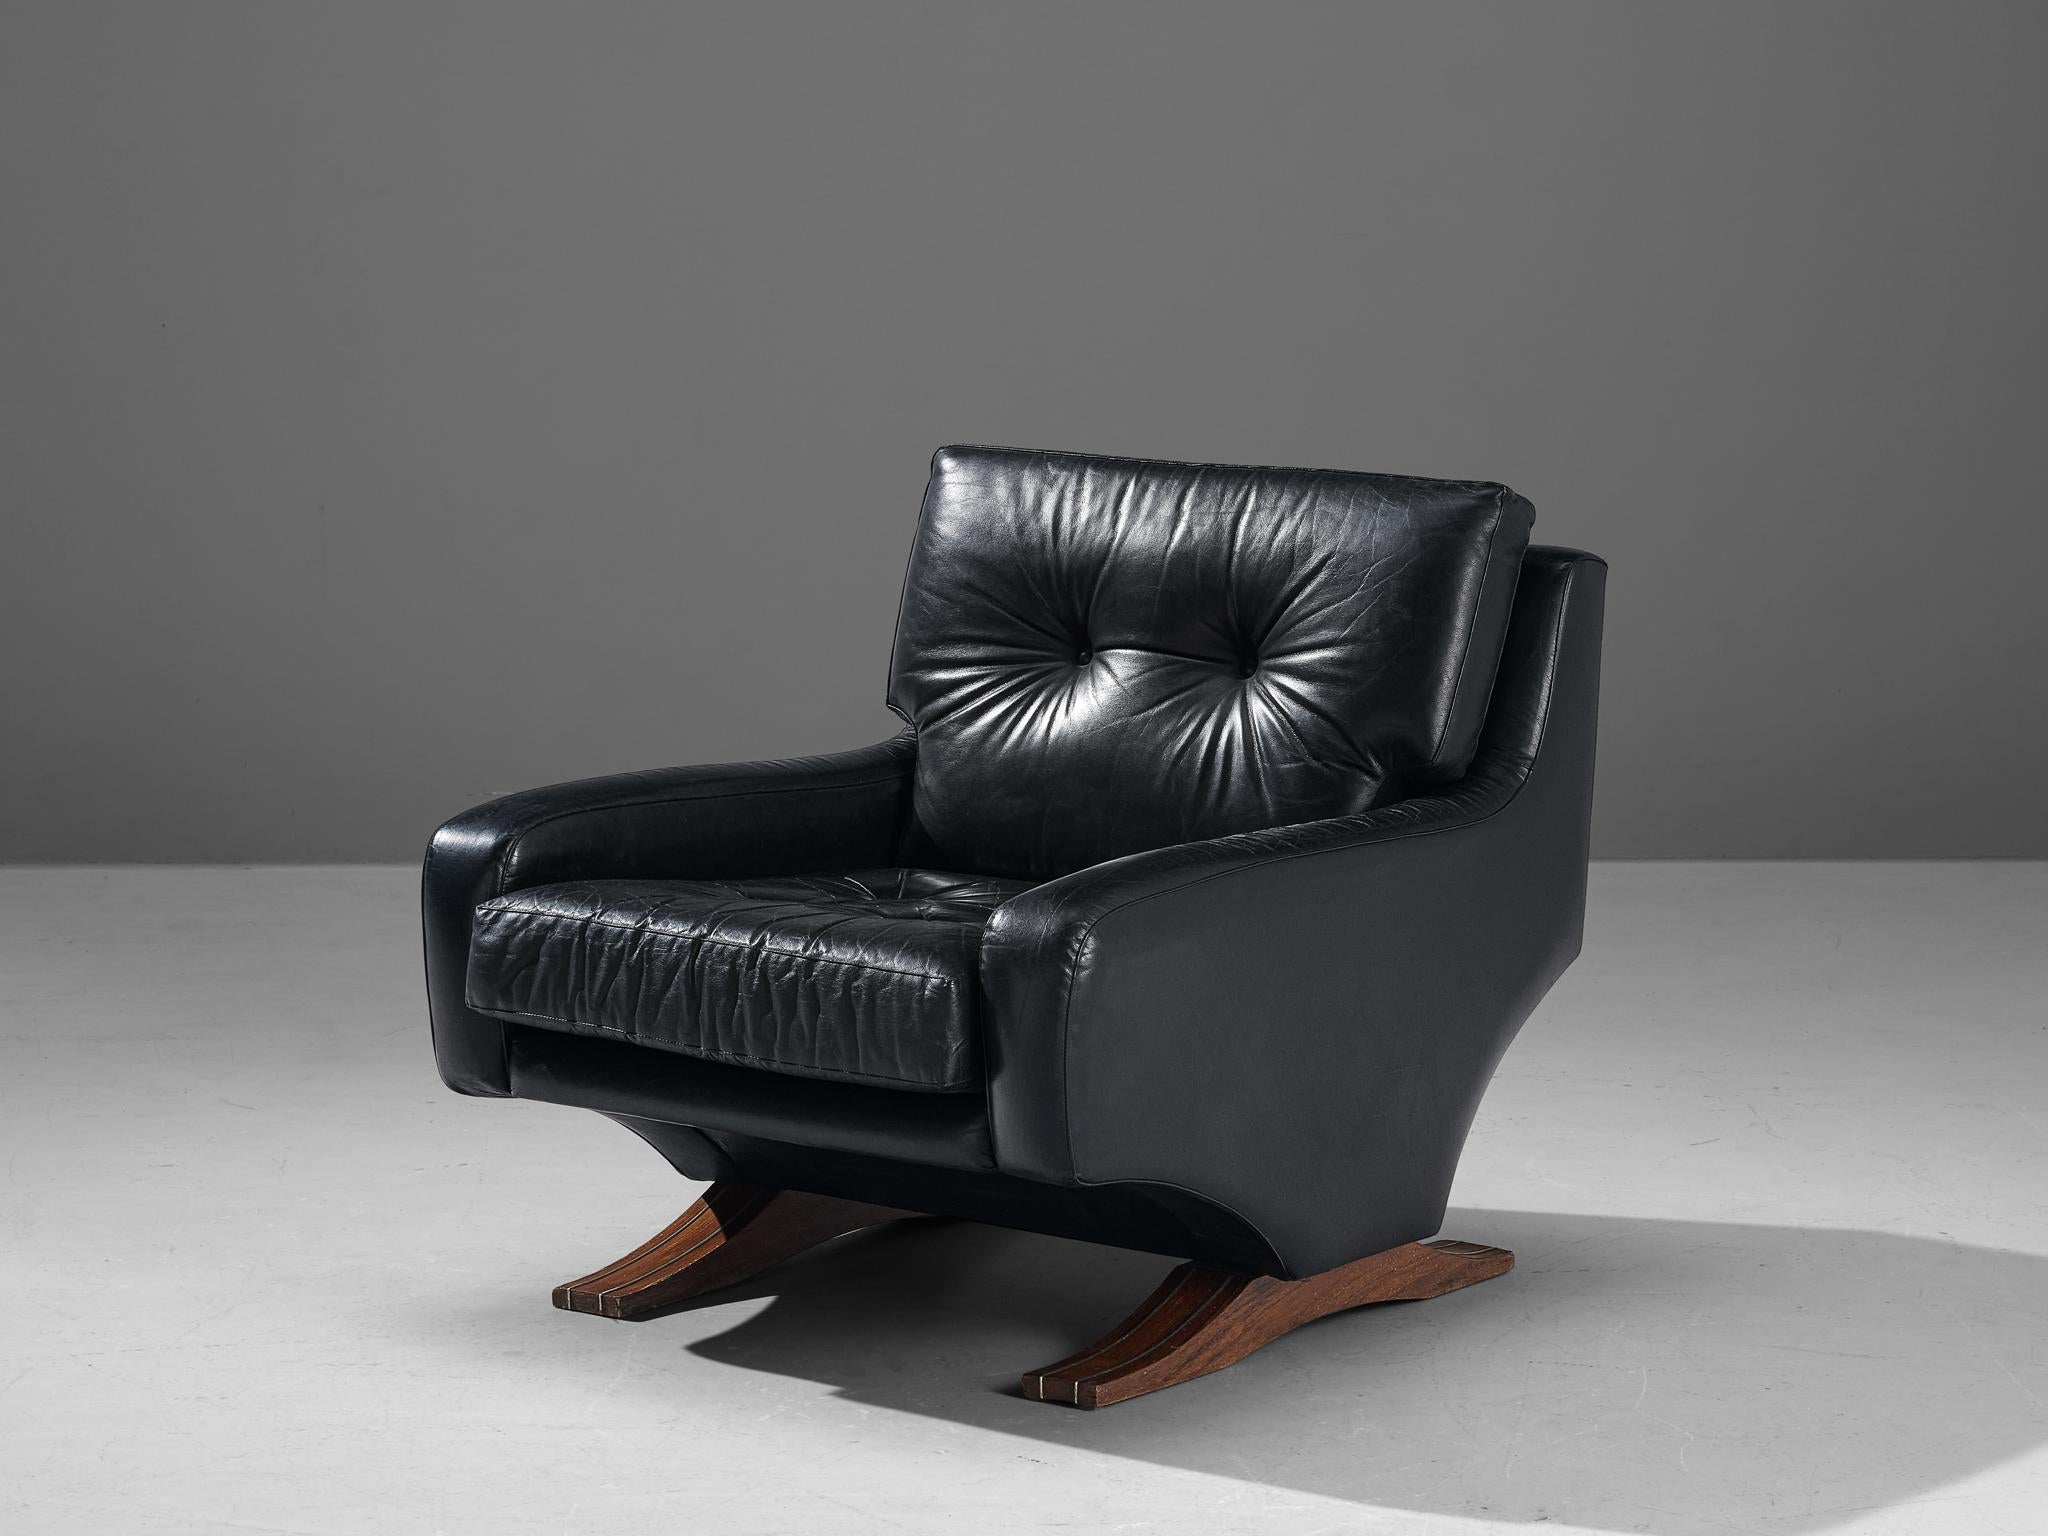 Franz Sartori for Flexform, lounge chair, leather, stained wood, metal, Italy, circa 1965.

This robust easy chair, designed by Italian sculptor Franz Sartori, stands as a testament to mid-century modern design. Enveloped in black leather, the